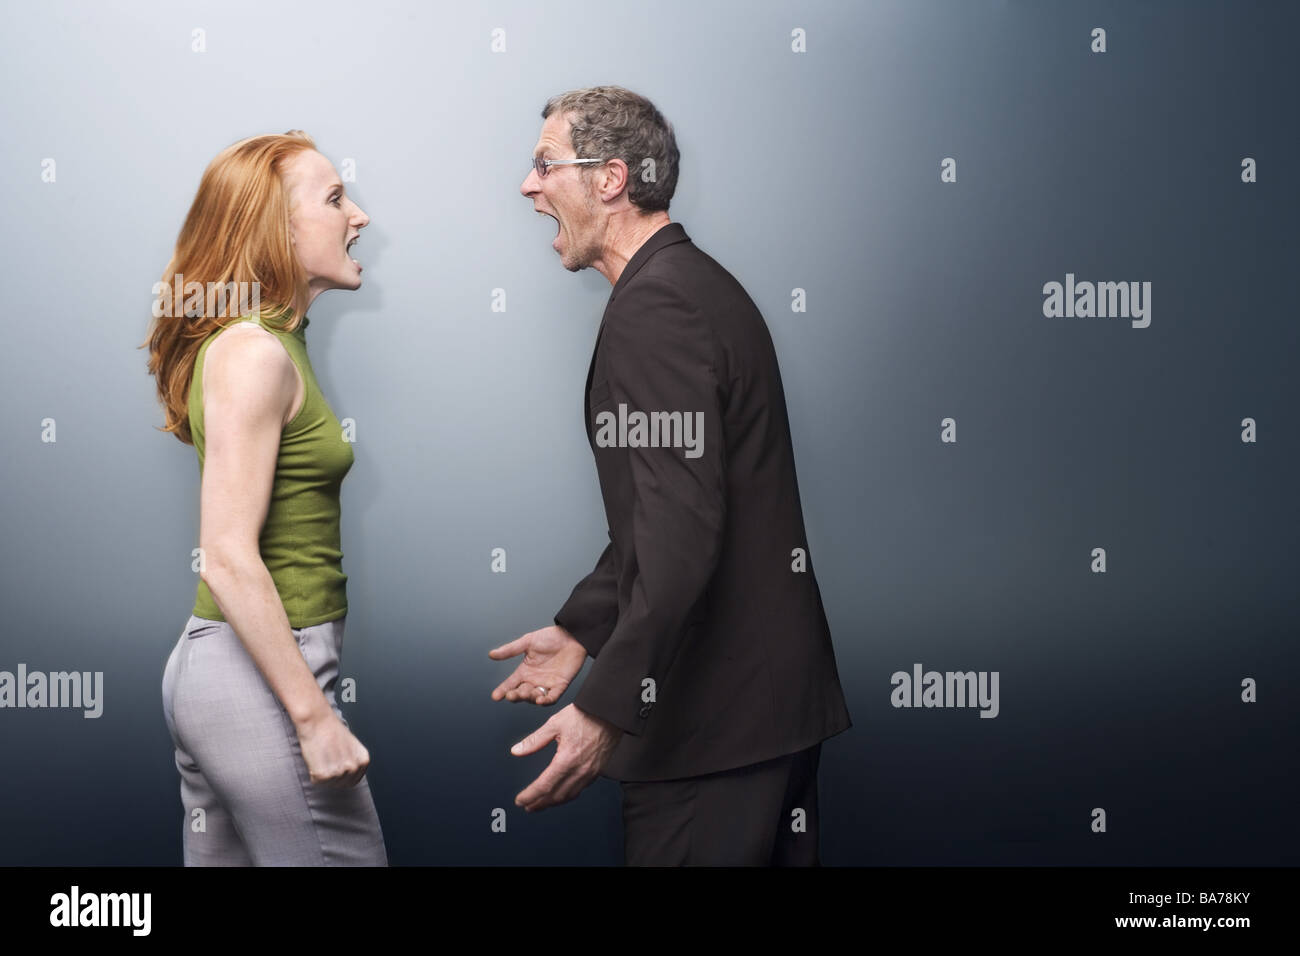 Mate dispute screams stands opposite at the side series people two 20-30 years 40-50 years ages old-age-difference adults Stock Photo